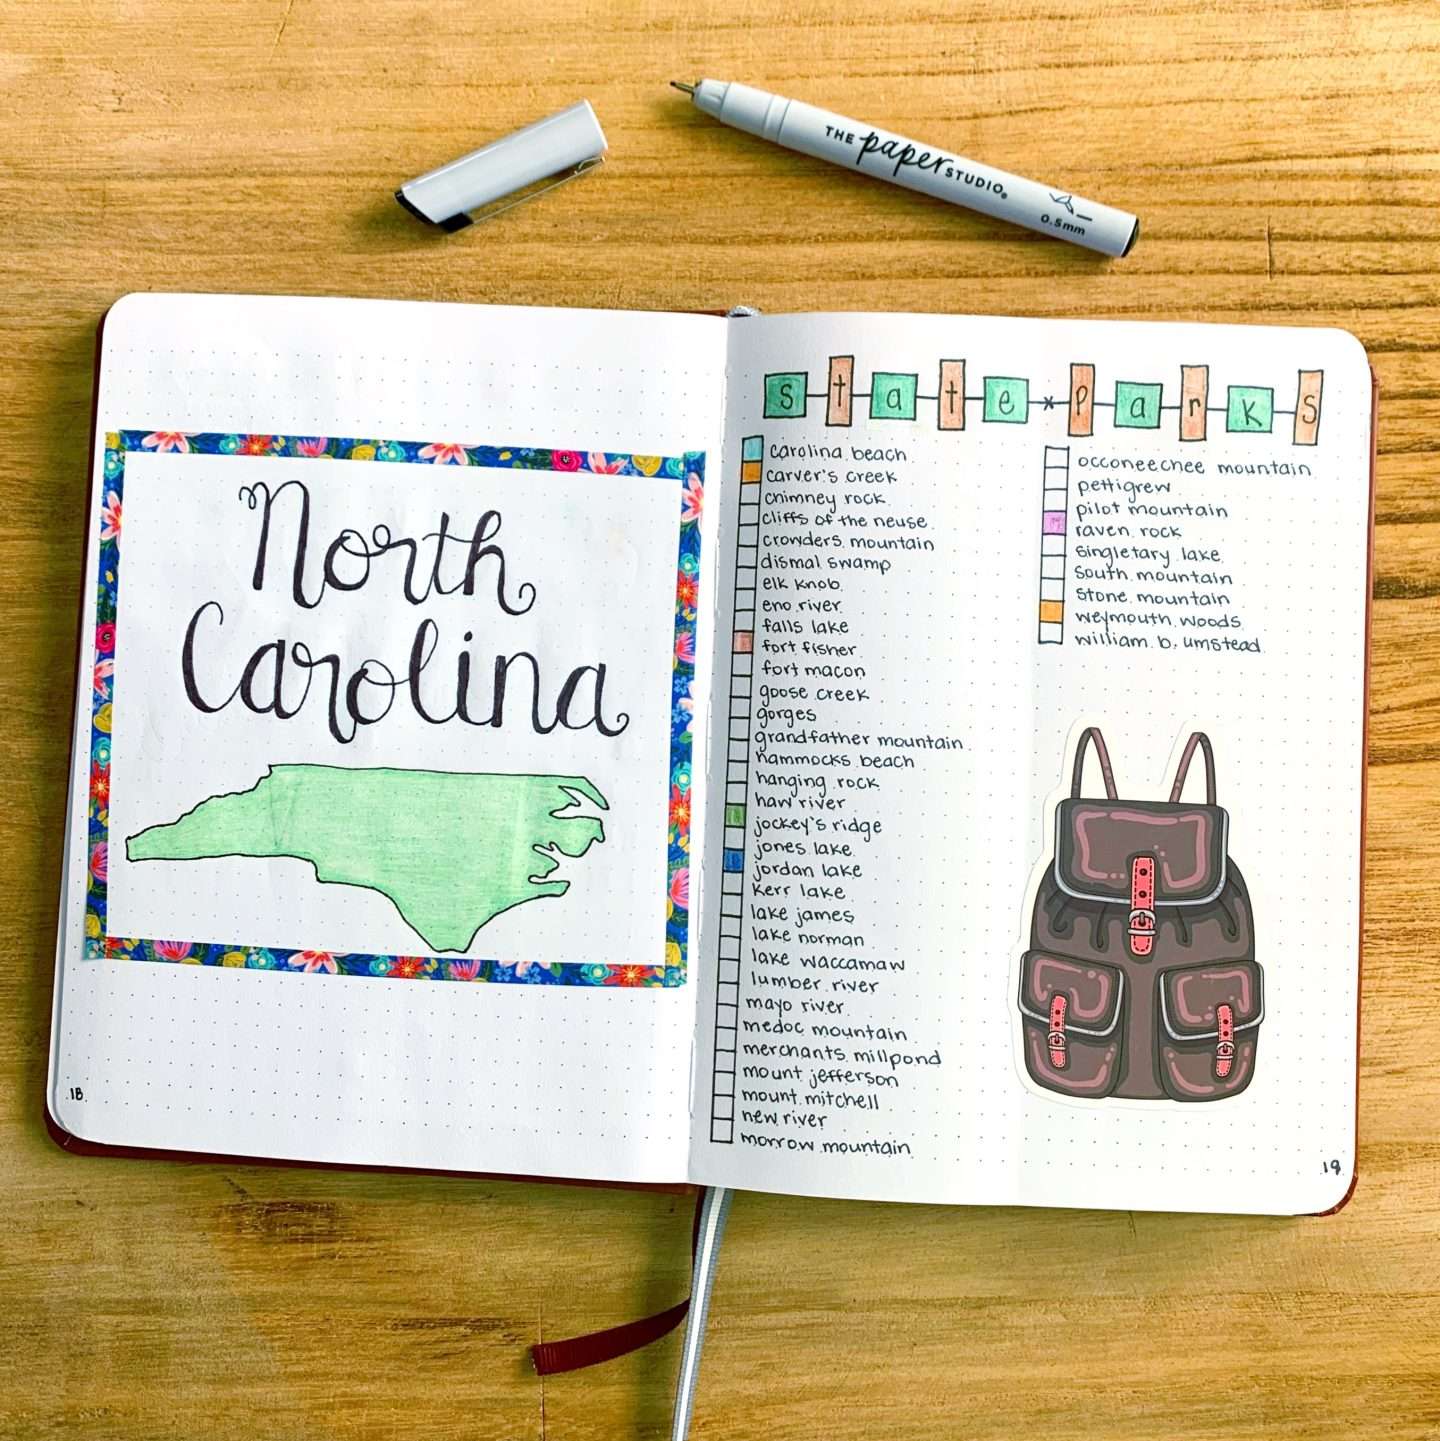 I added our Fort Liberty and North Carolina bucket list to my bucket list bullet journal.